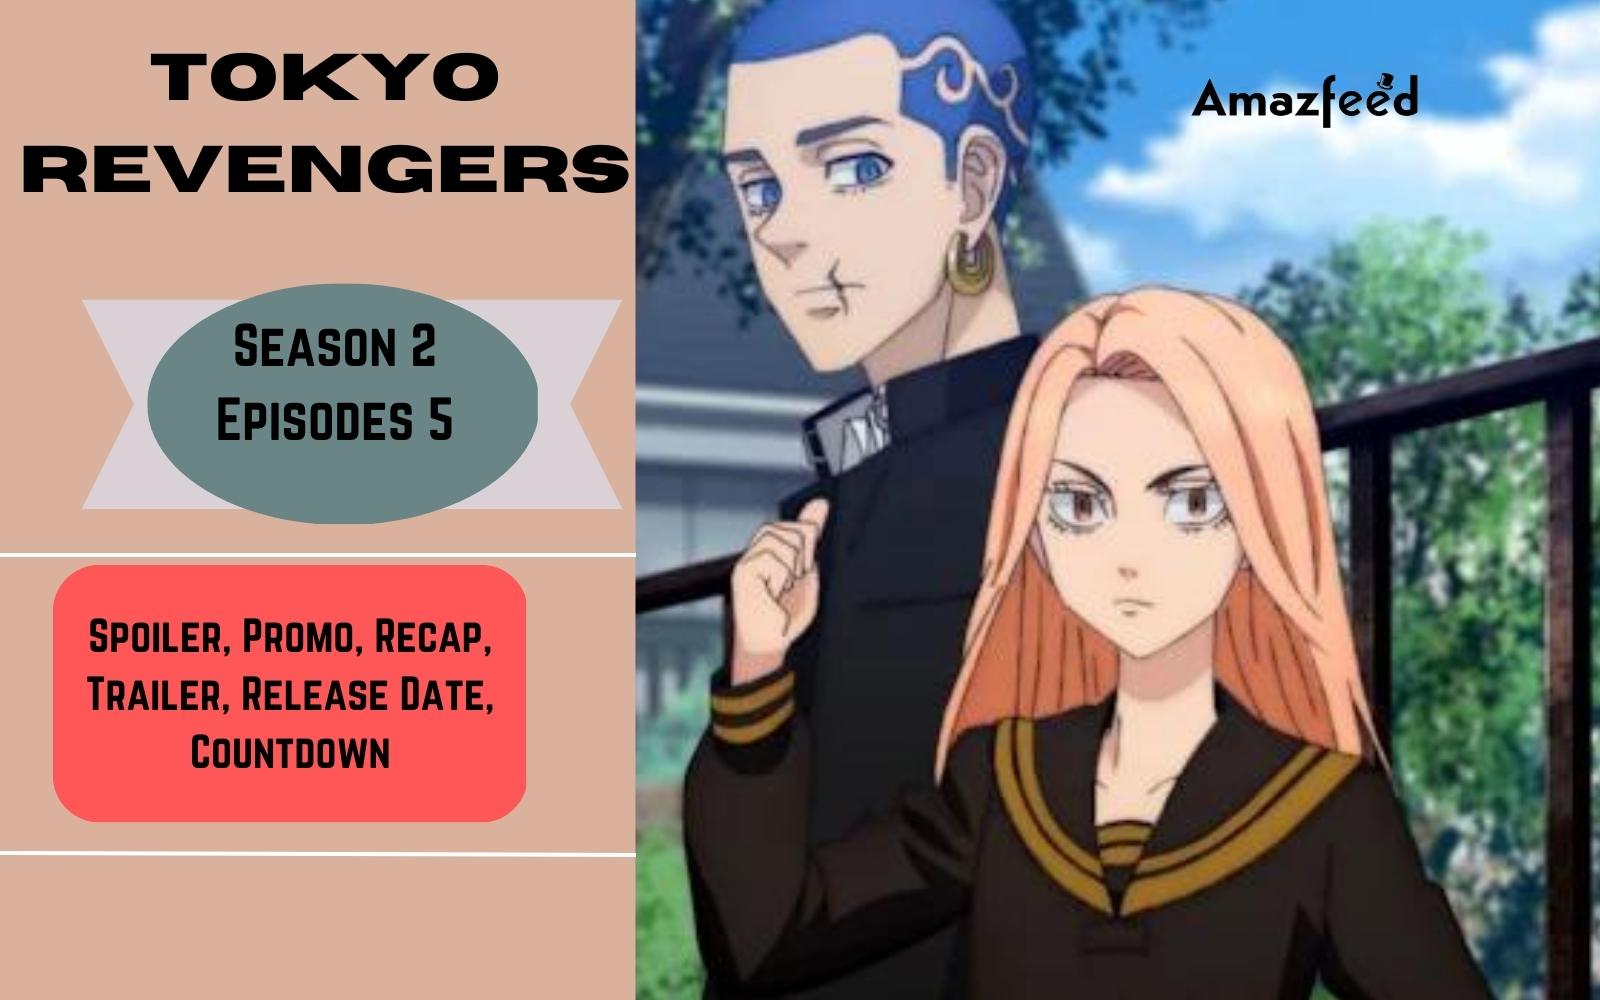 Tokyo Revengers Season 2 Episode 5 Release date, Spoiler, Recap &  Everything You Want To Know » Amazfeed